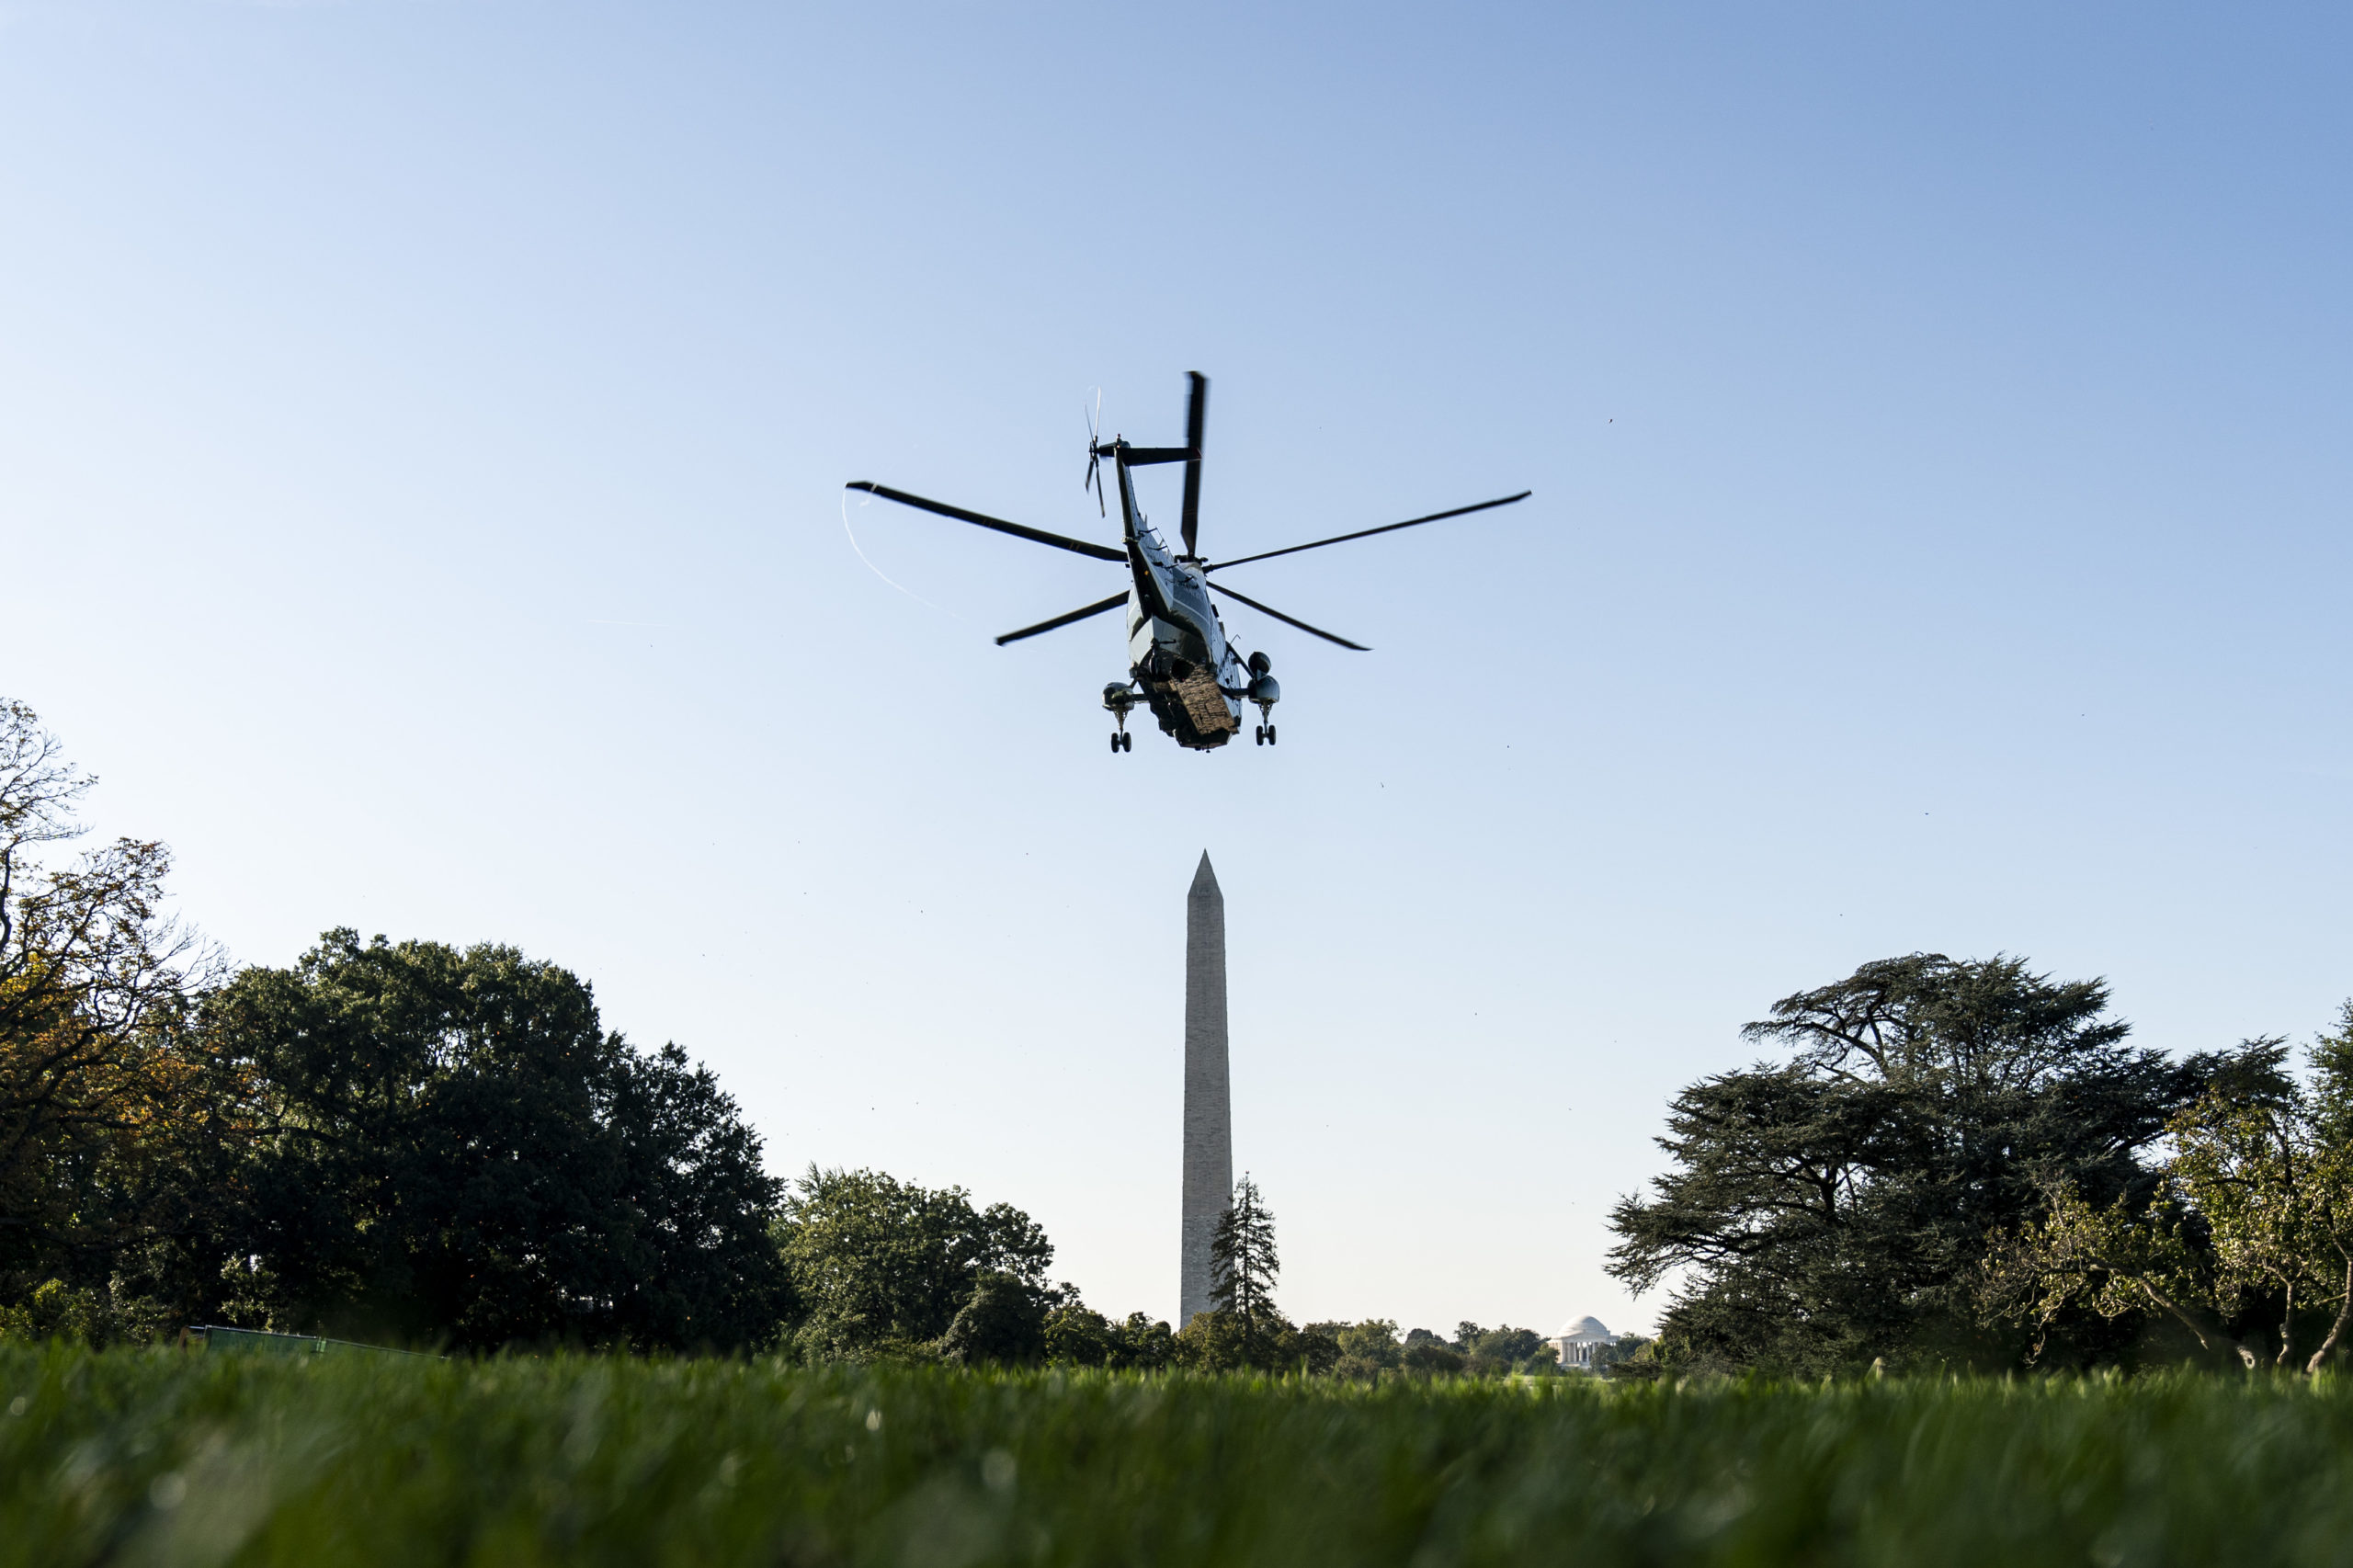 WASHINGTON, DC - OCTOBER 2: Marine One carries U.S. President Joe Biden as he departs for Wilmington, Delaware, from the White House on October 2, 2021 in Washington, DC. Biden has put on hold his $1 trillion infrastructure bill telling Congressional Democrats that his climate change and social spending bill must be passed first. (Photo by Joshua Roberts/Getty Images)